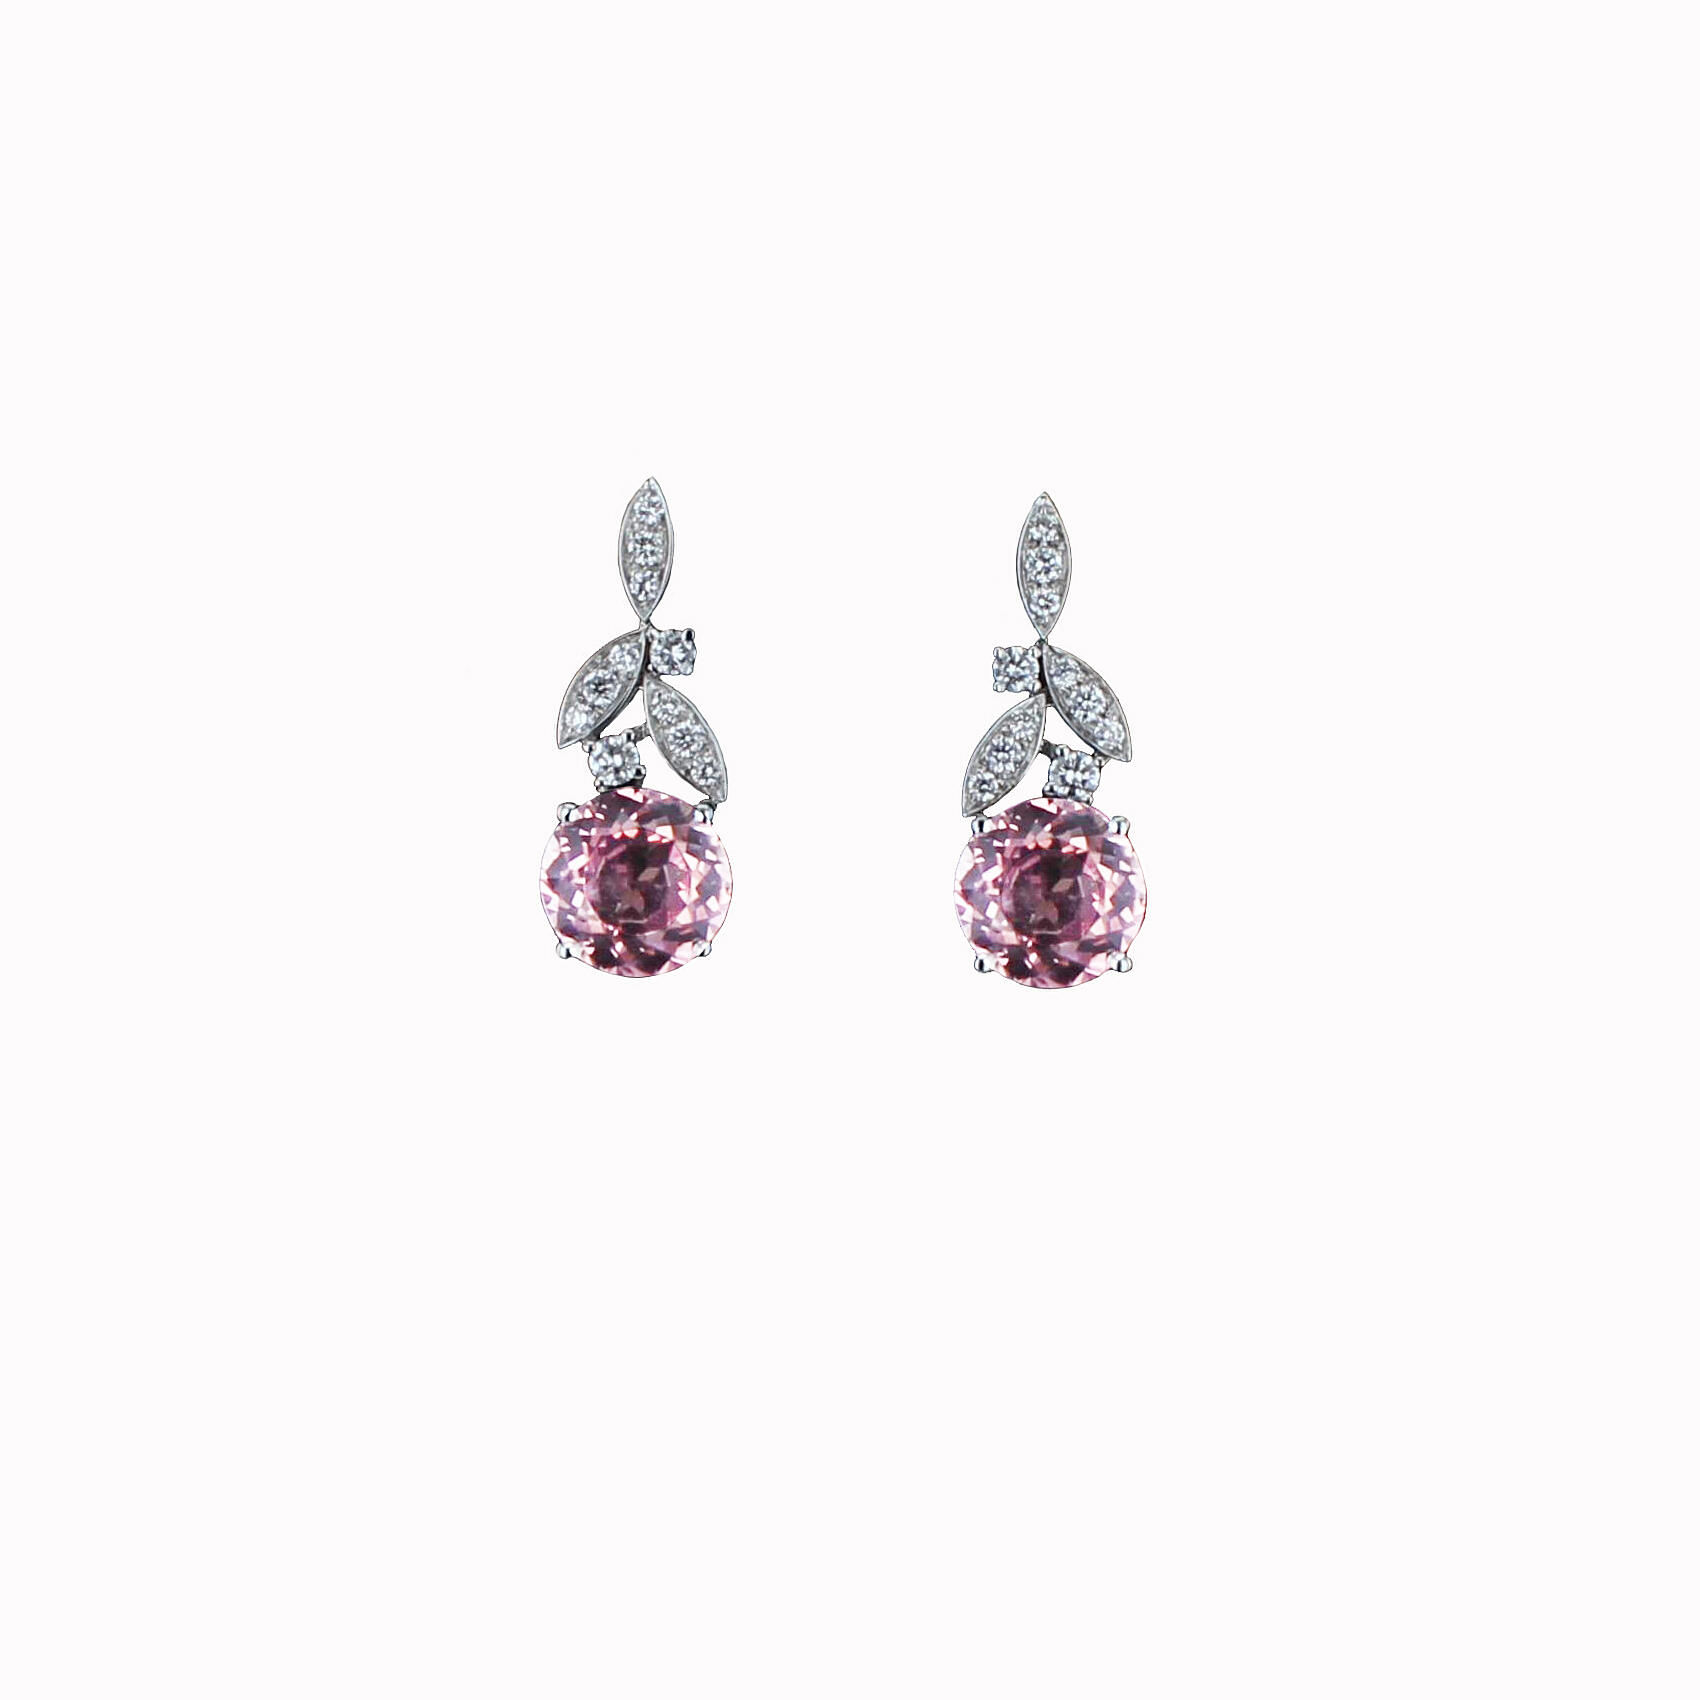 Pair of Schroeder Joailliers "Couronne de Chêne" collection earrings in 18k white gold